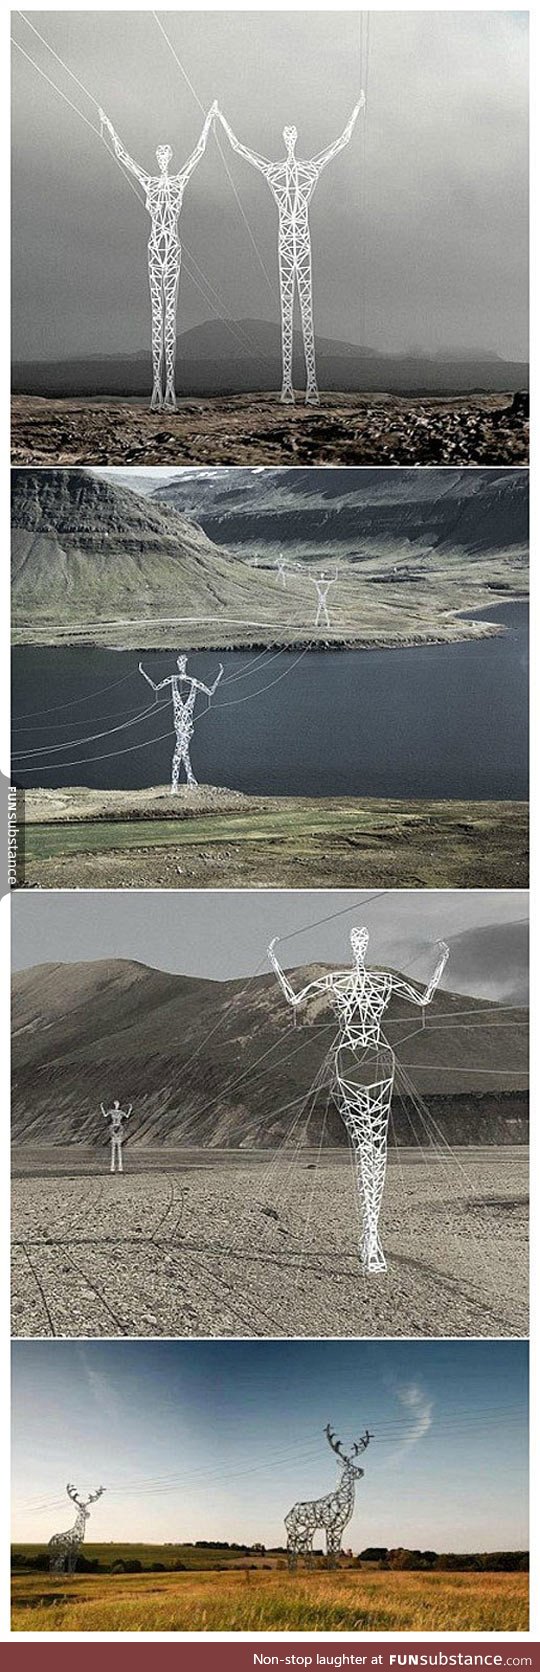 Electric poles in iceland